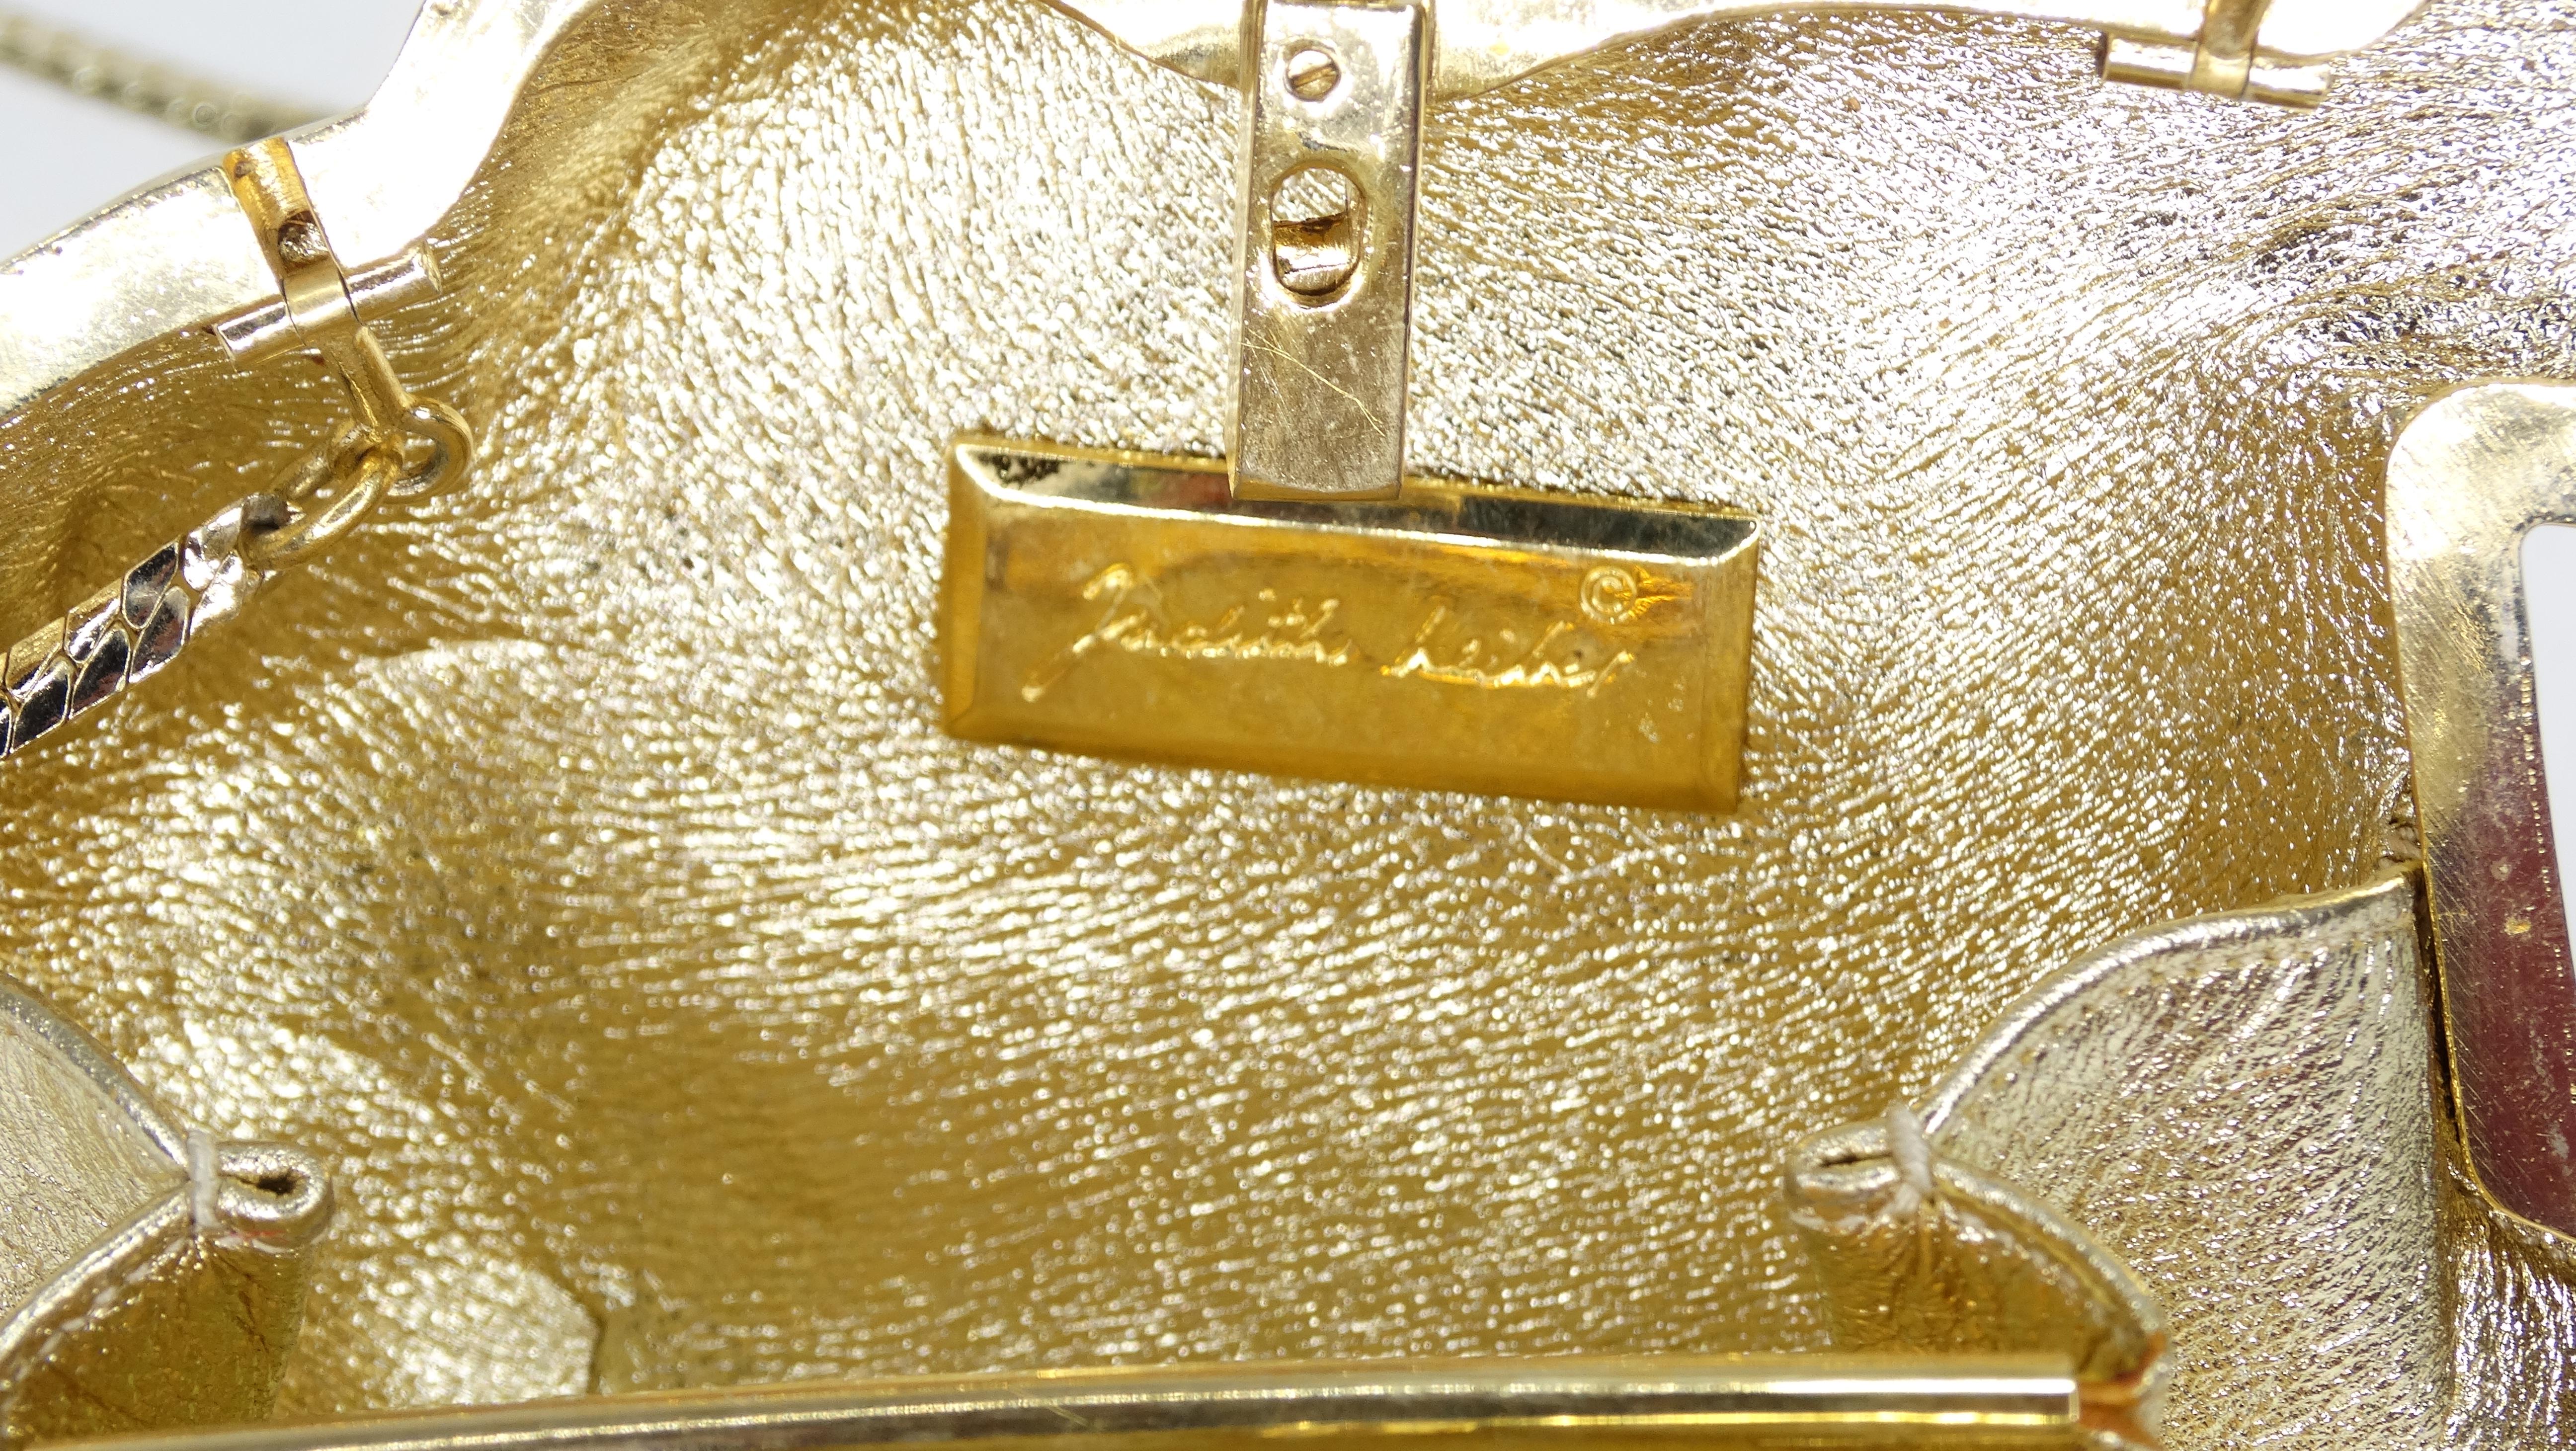 Judith Leiber 1984 Bullfrog Miniaudiere In Good Condition For Sale In Scottsdale, AZ